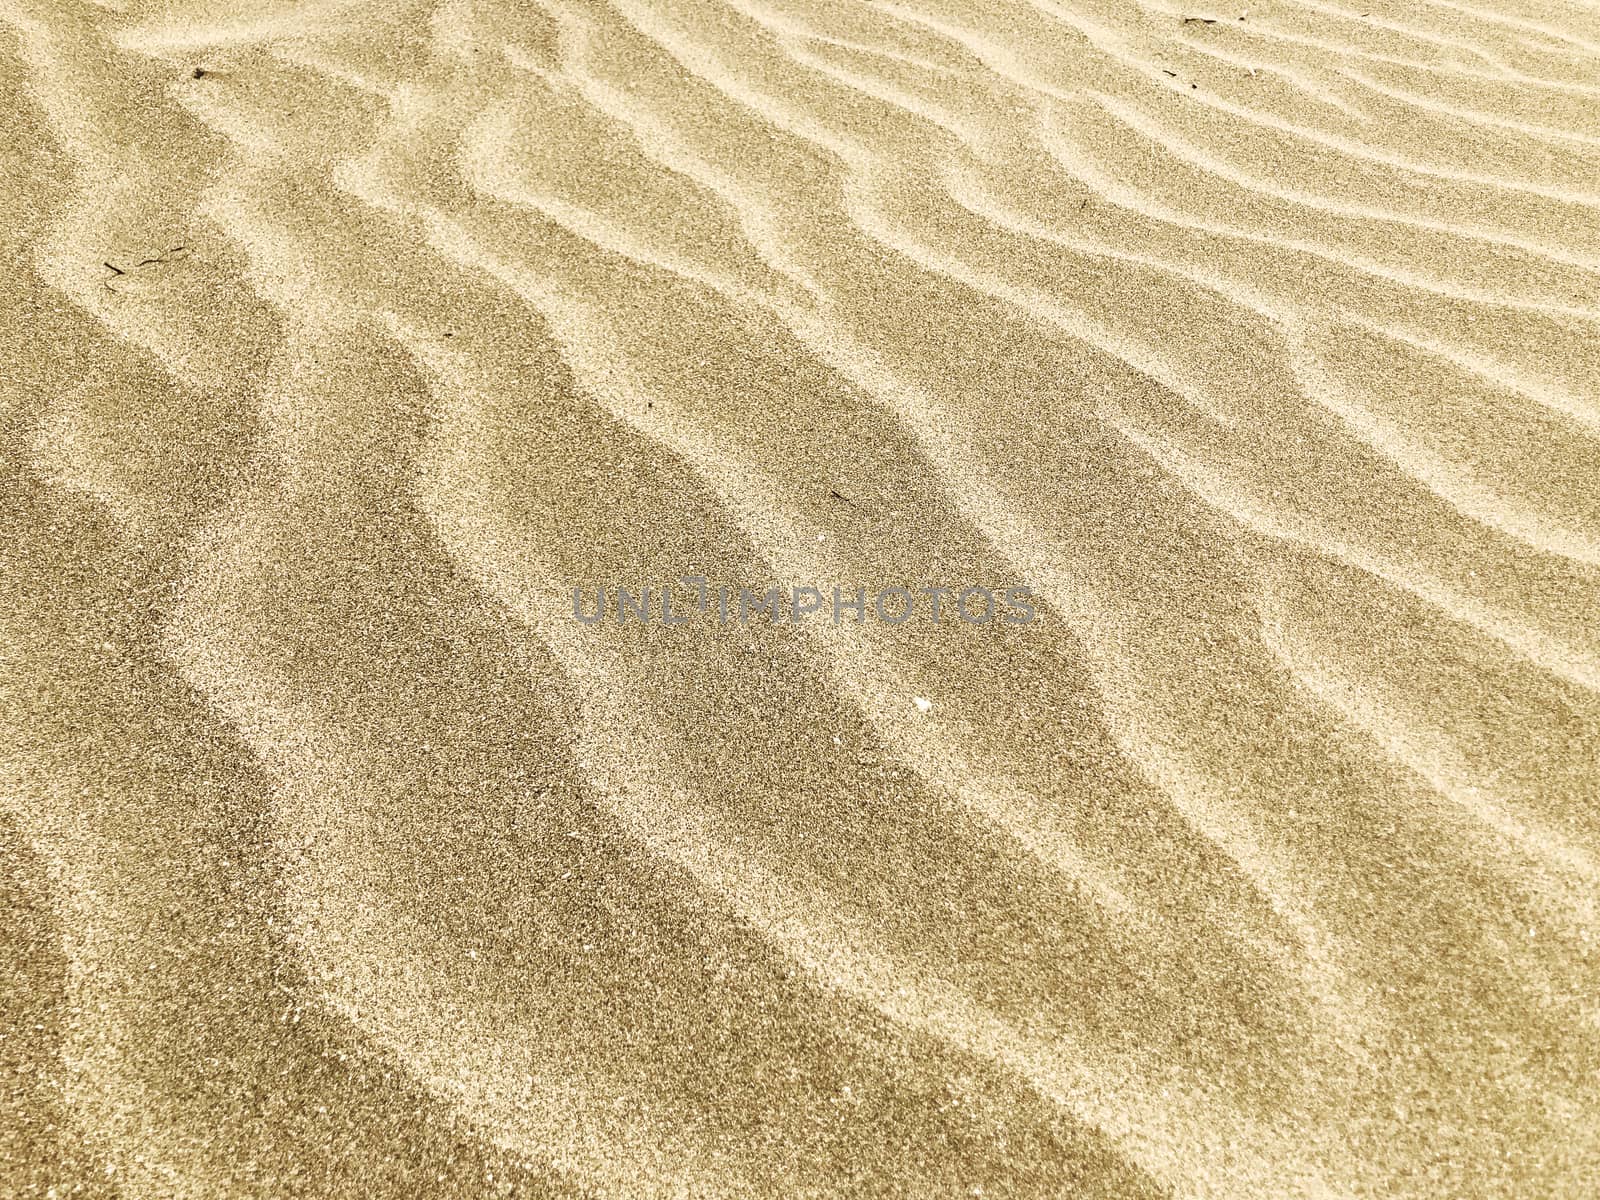 Close-Up Of Sand Background Texture by nenovbrothers